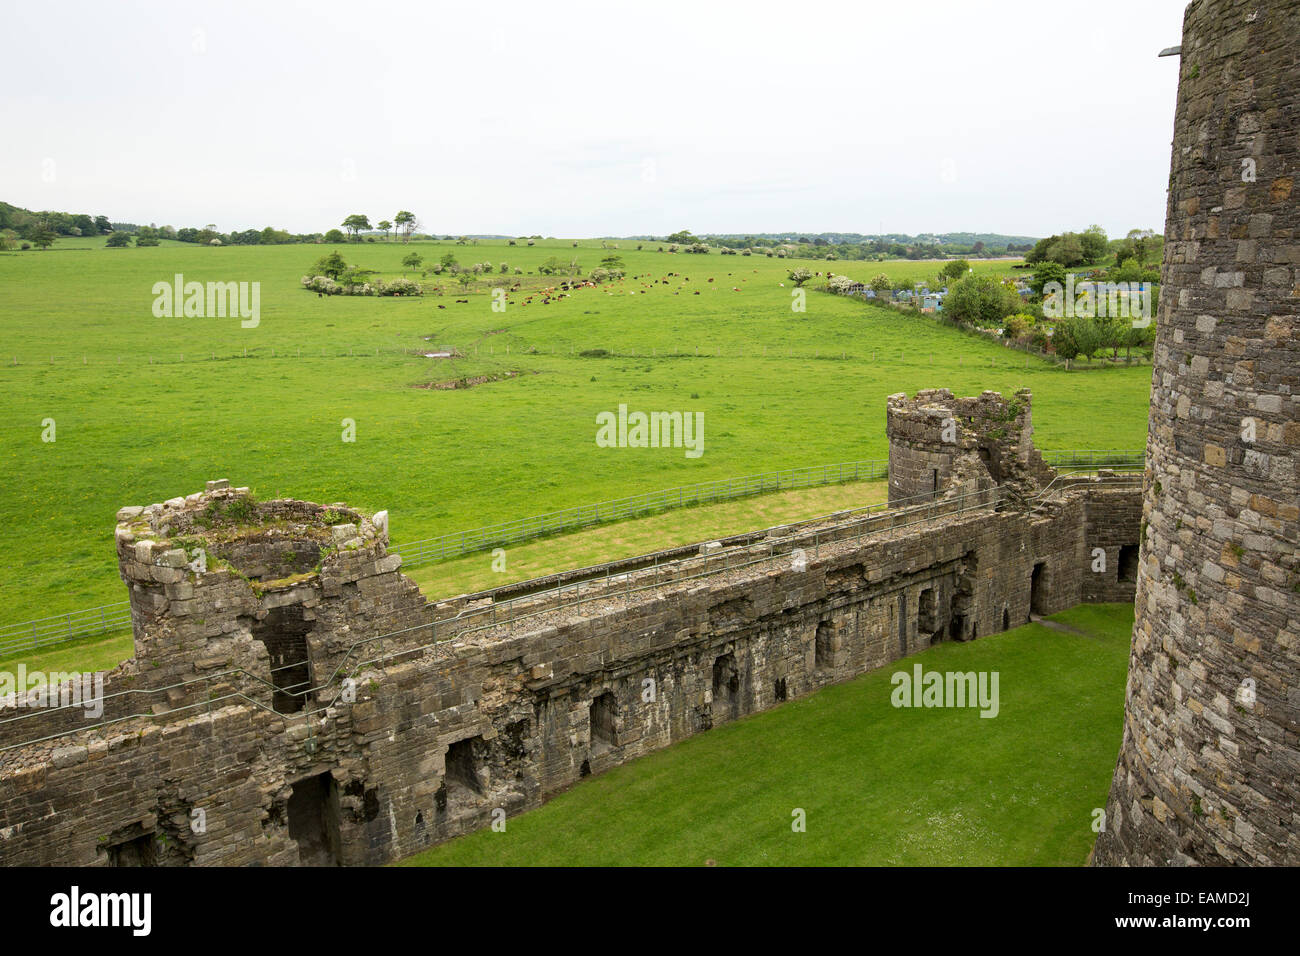 View from high walls of Beaumaris castle of ancient walls of fort & emerald farmlands stretching to horizon on Isle of Anglesey Stock Photo